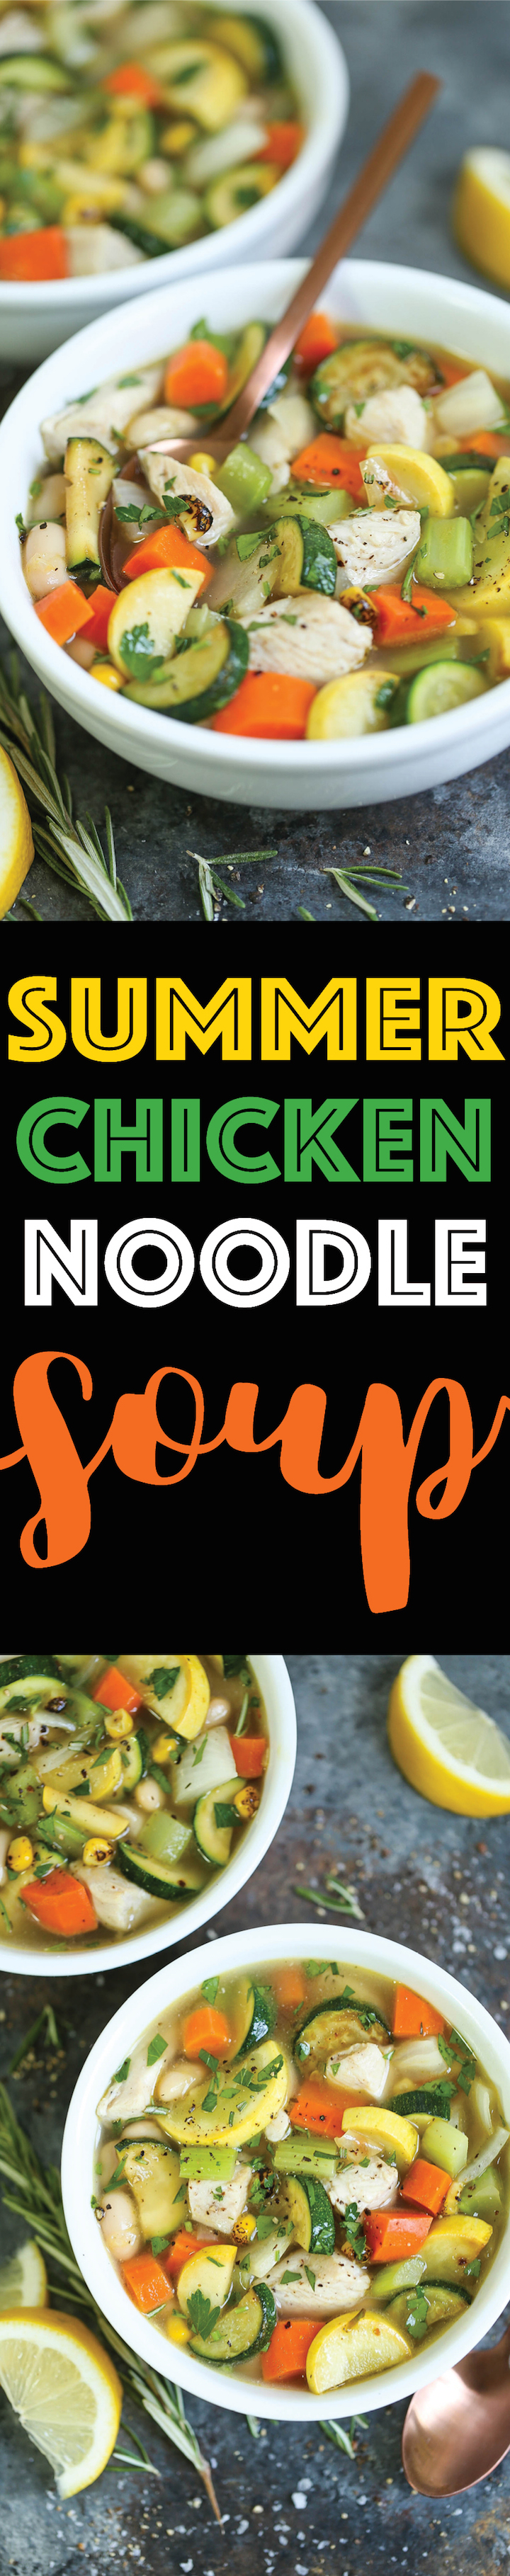 Summer Chicken Noodle Soup - Everyone's favorite classic chicken noodle soup using summer vegetables! So hearty, comforting and cozy, even in the heat!